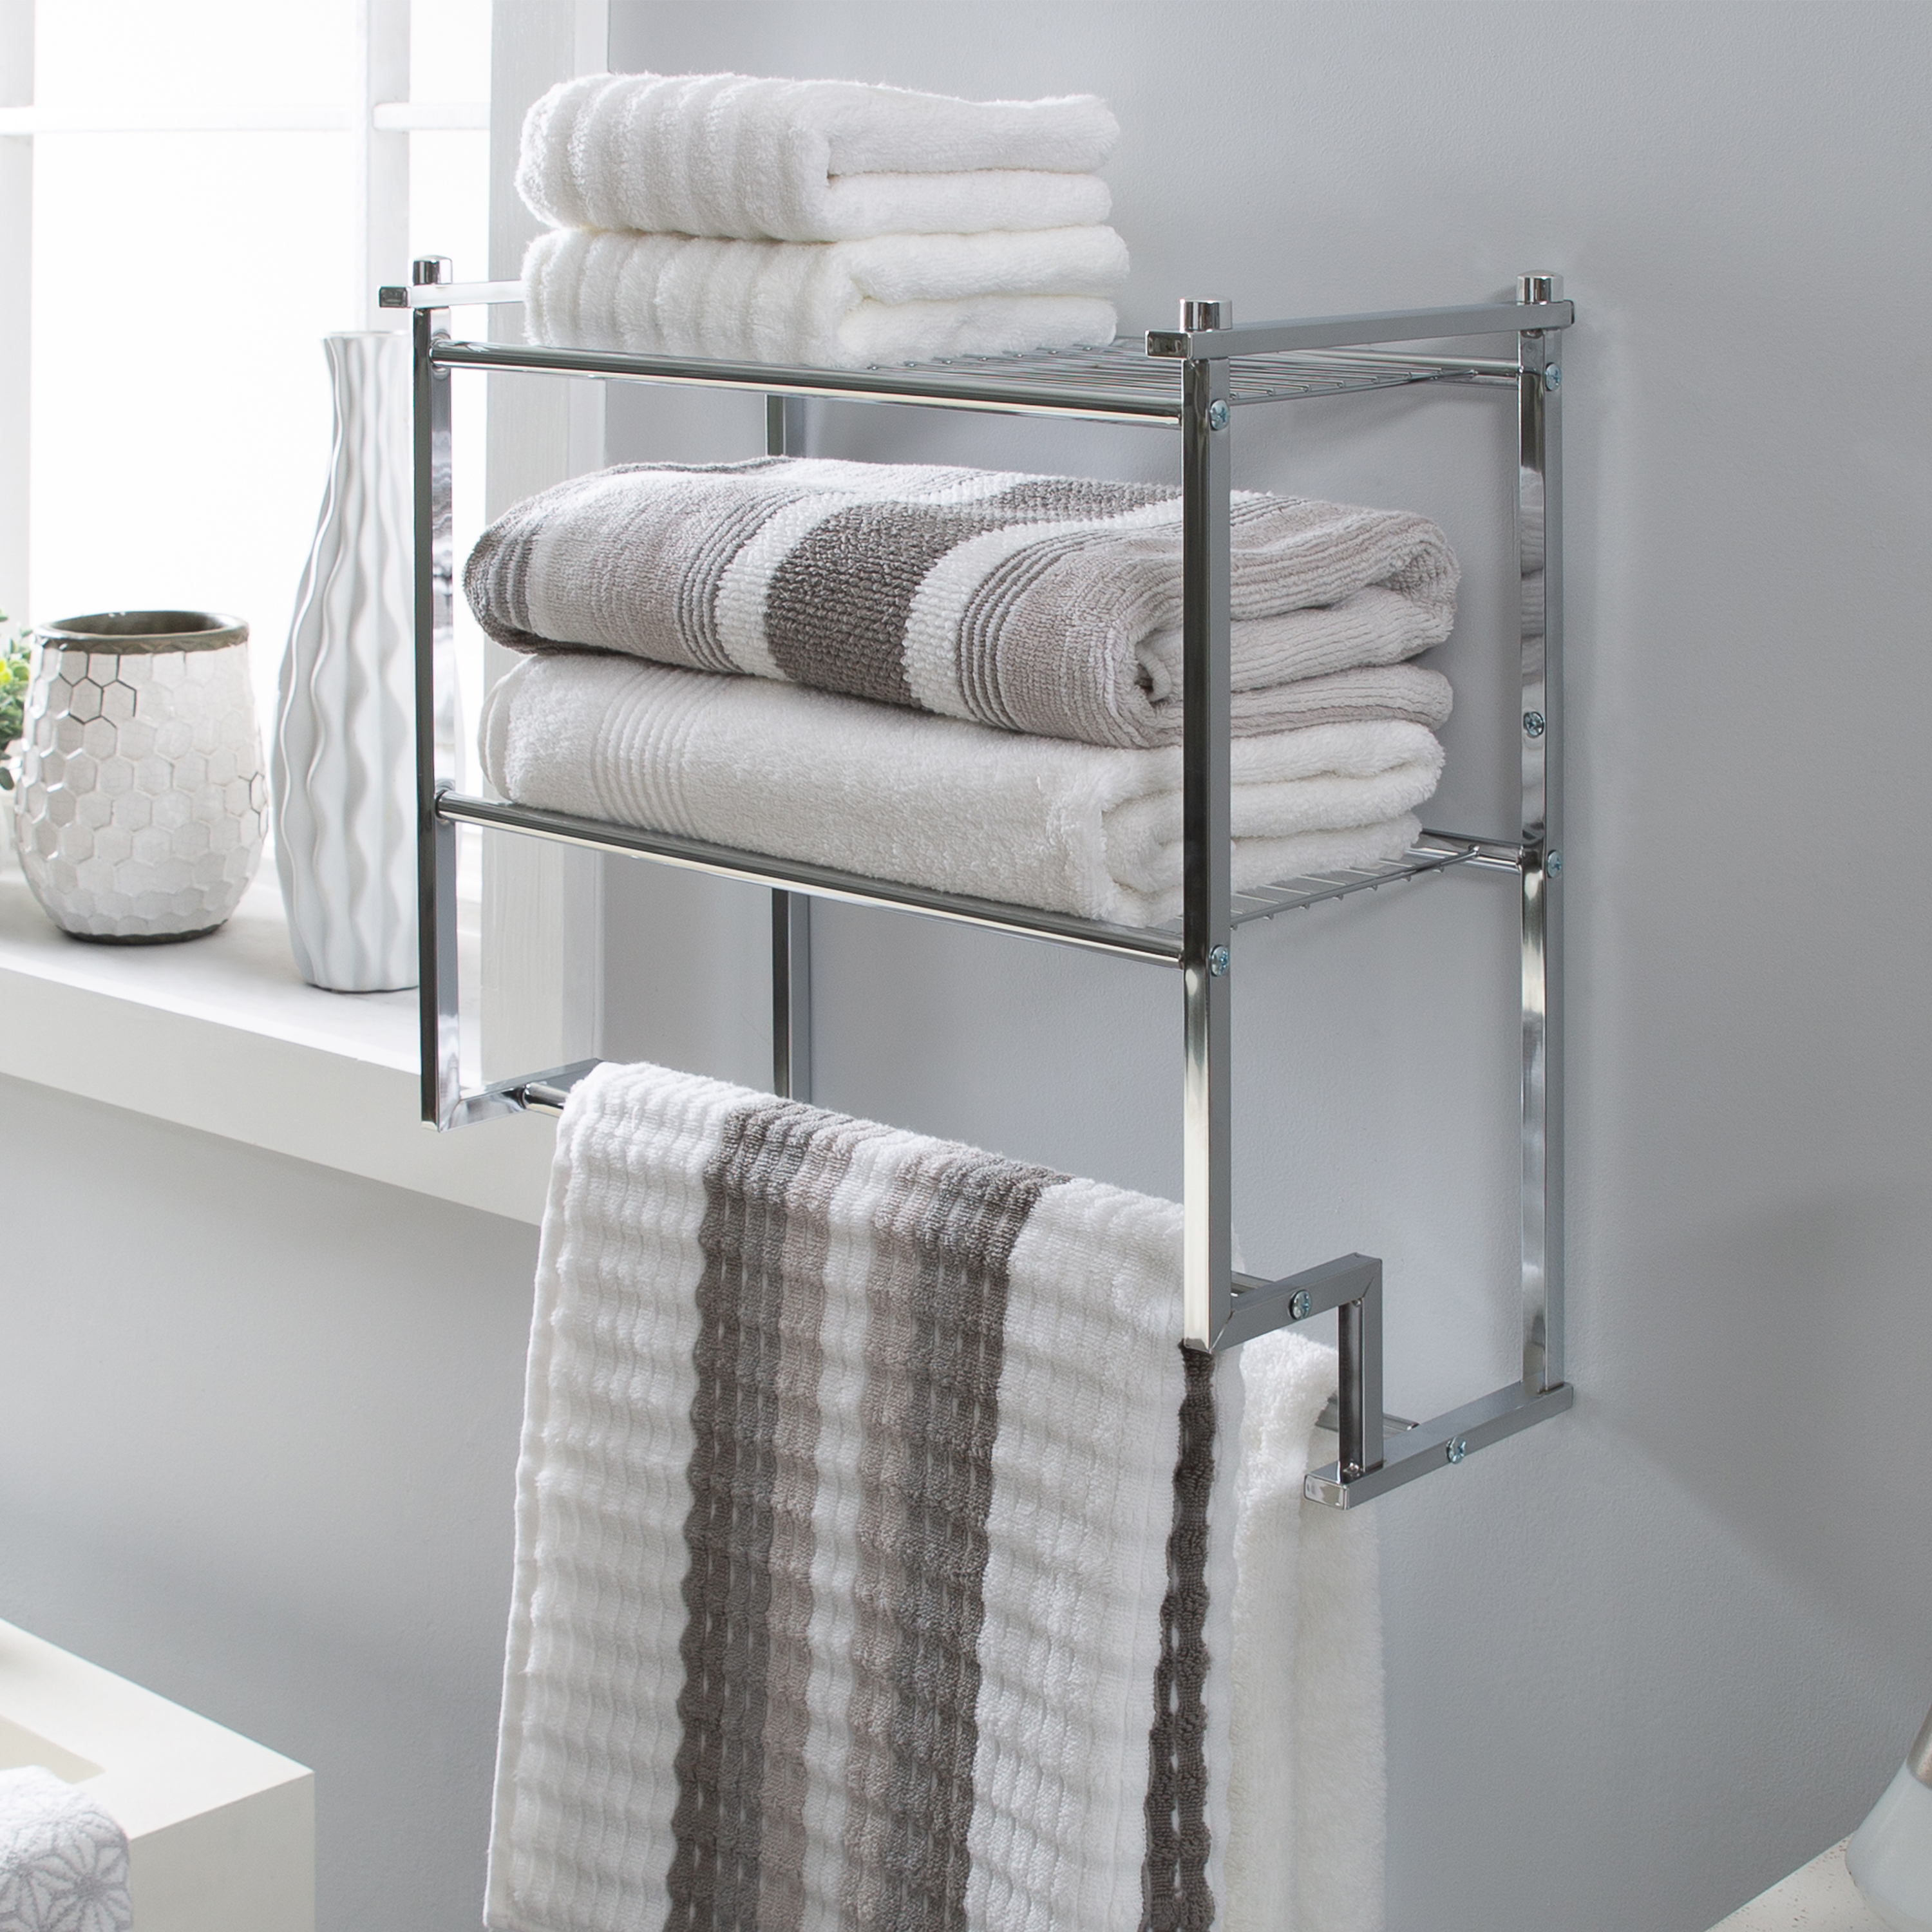 Organize It All 2 Tier Wall Mounted Metal Shelf with Towel Rack - image 3 of 7